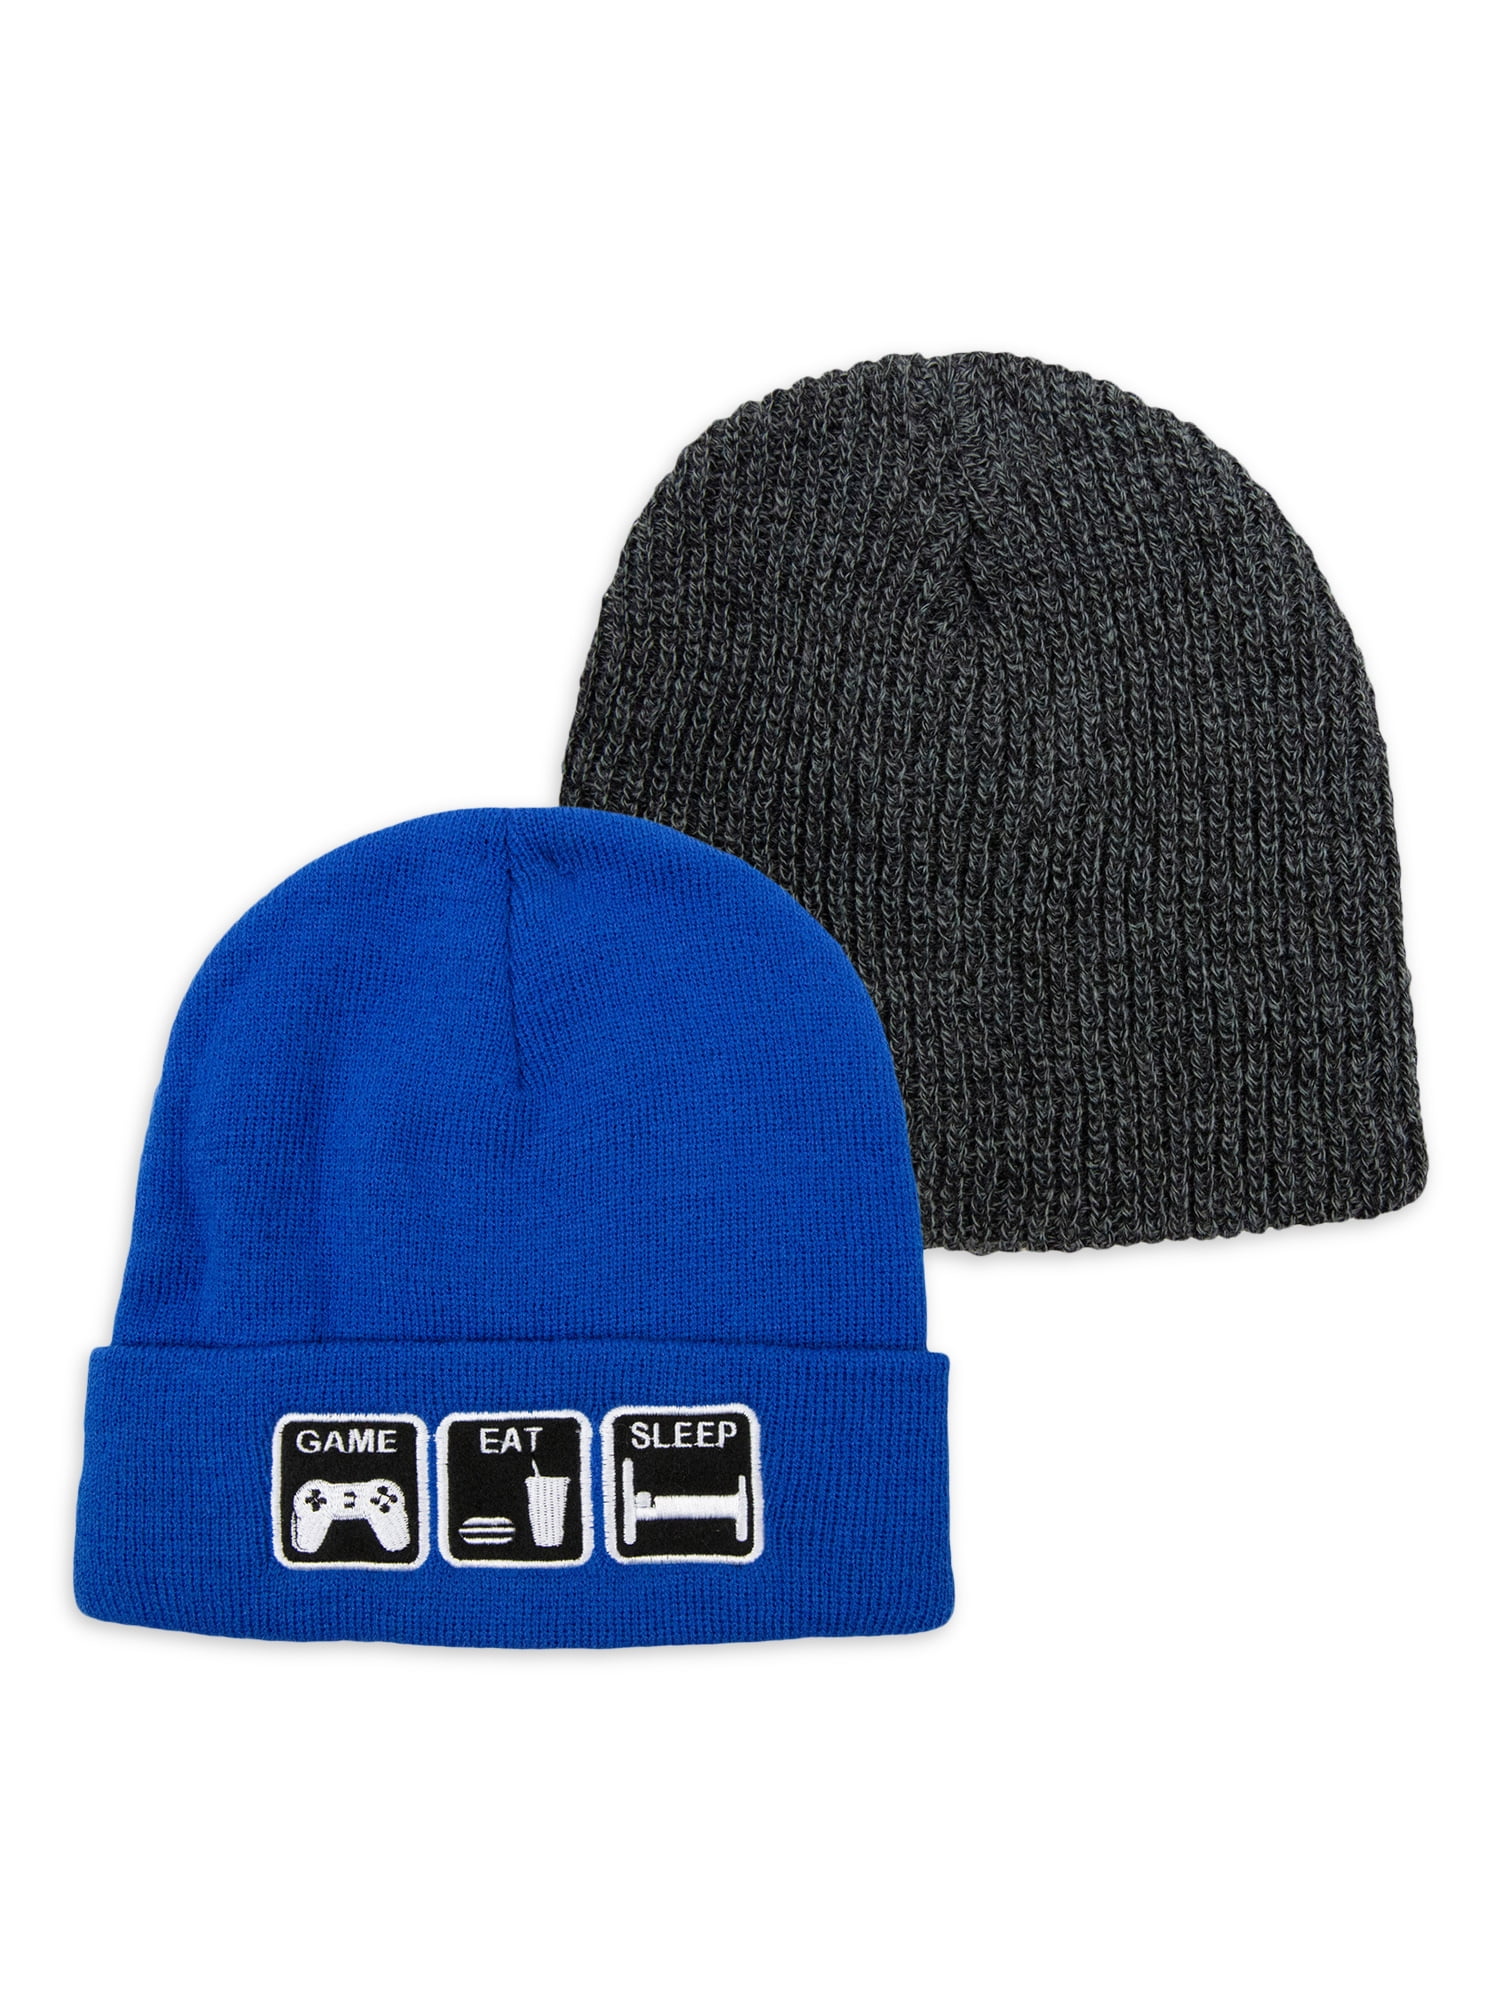 2-Pack Men's Beanie Sets: BNFY (Gamer & Grey) $3.44 ($1.72 Each), Neff (Peace Gone & Lawrence) $4.91 ($2.46 Each) & More + Free Shipping w/ Walmart+ or on $35+